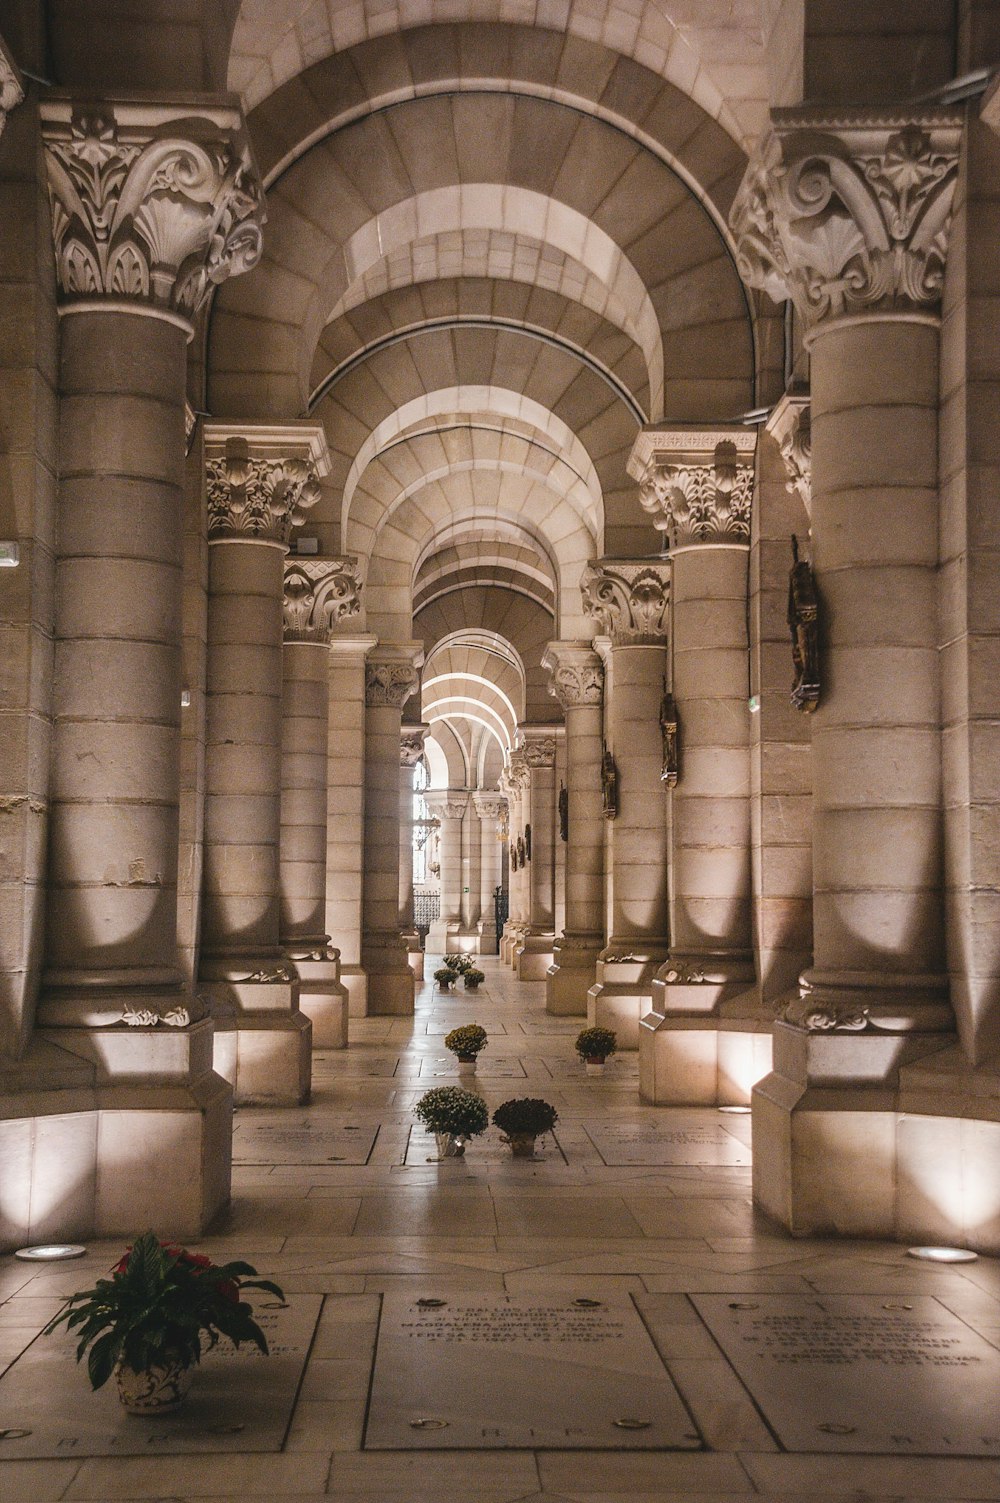 a long hallway with columns and flowers on the floor